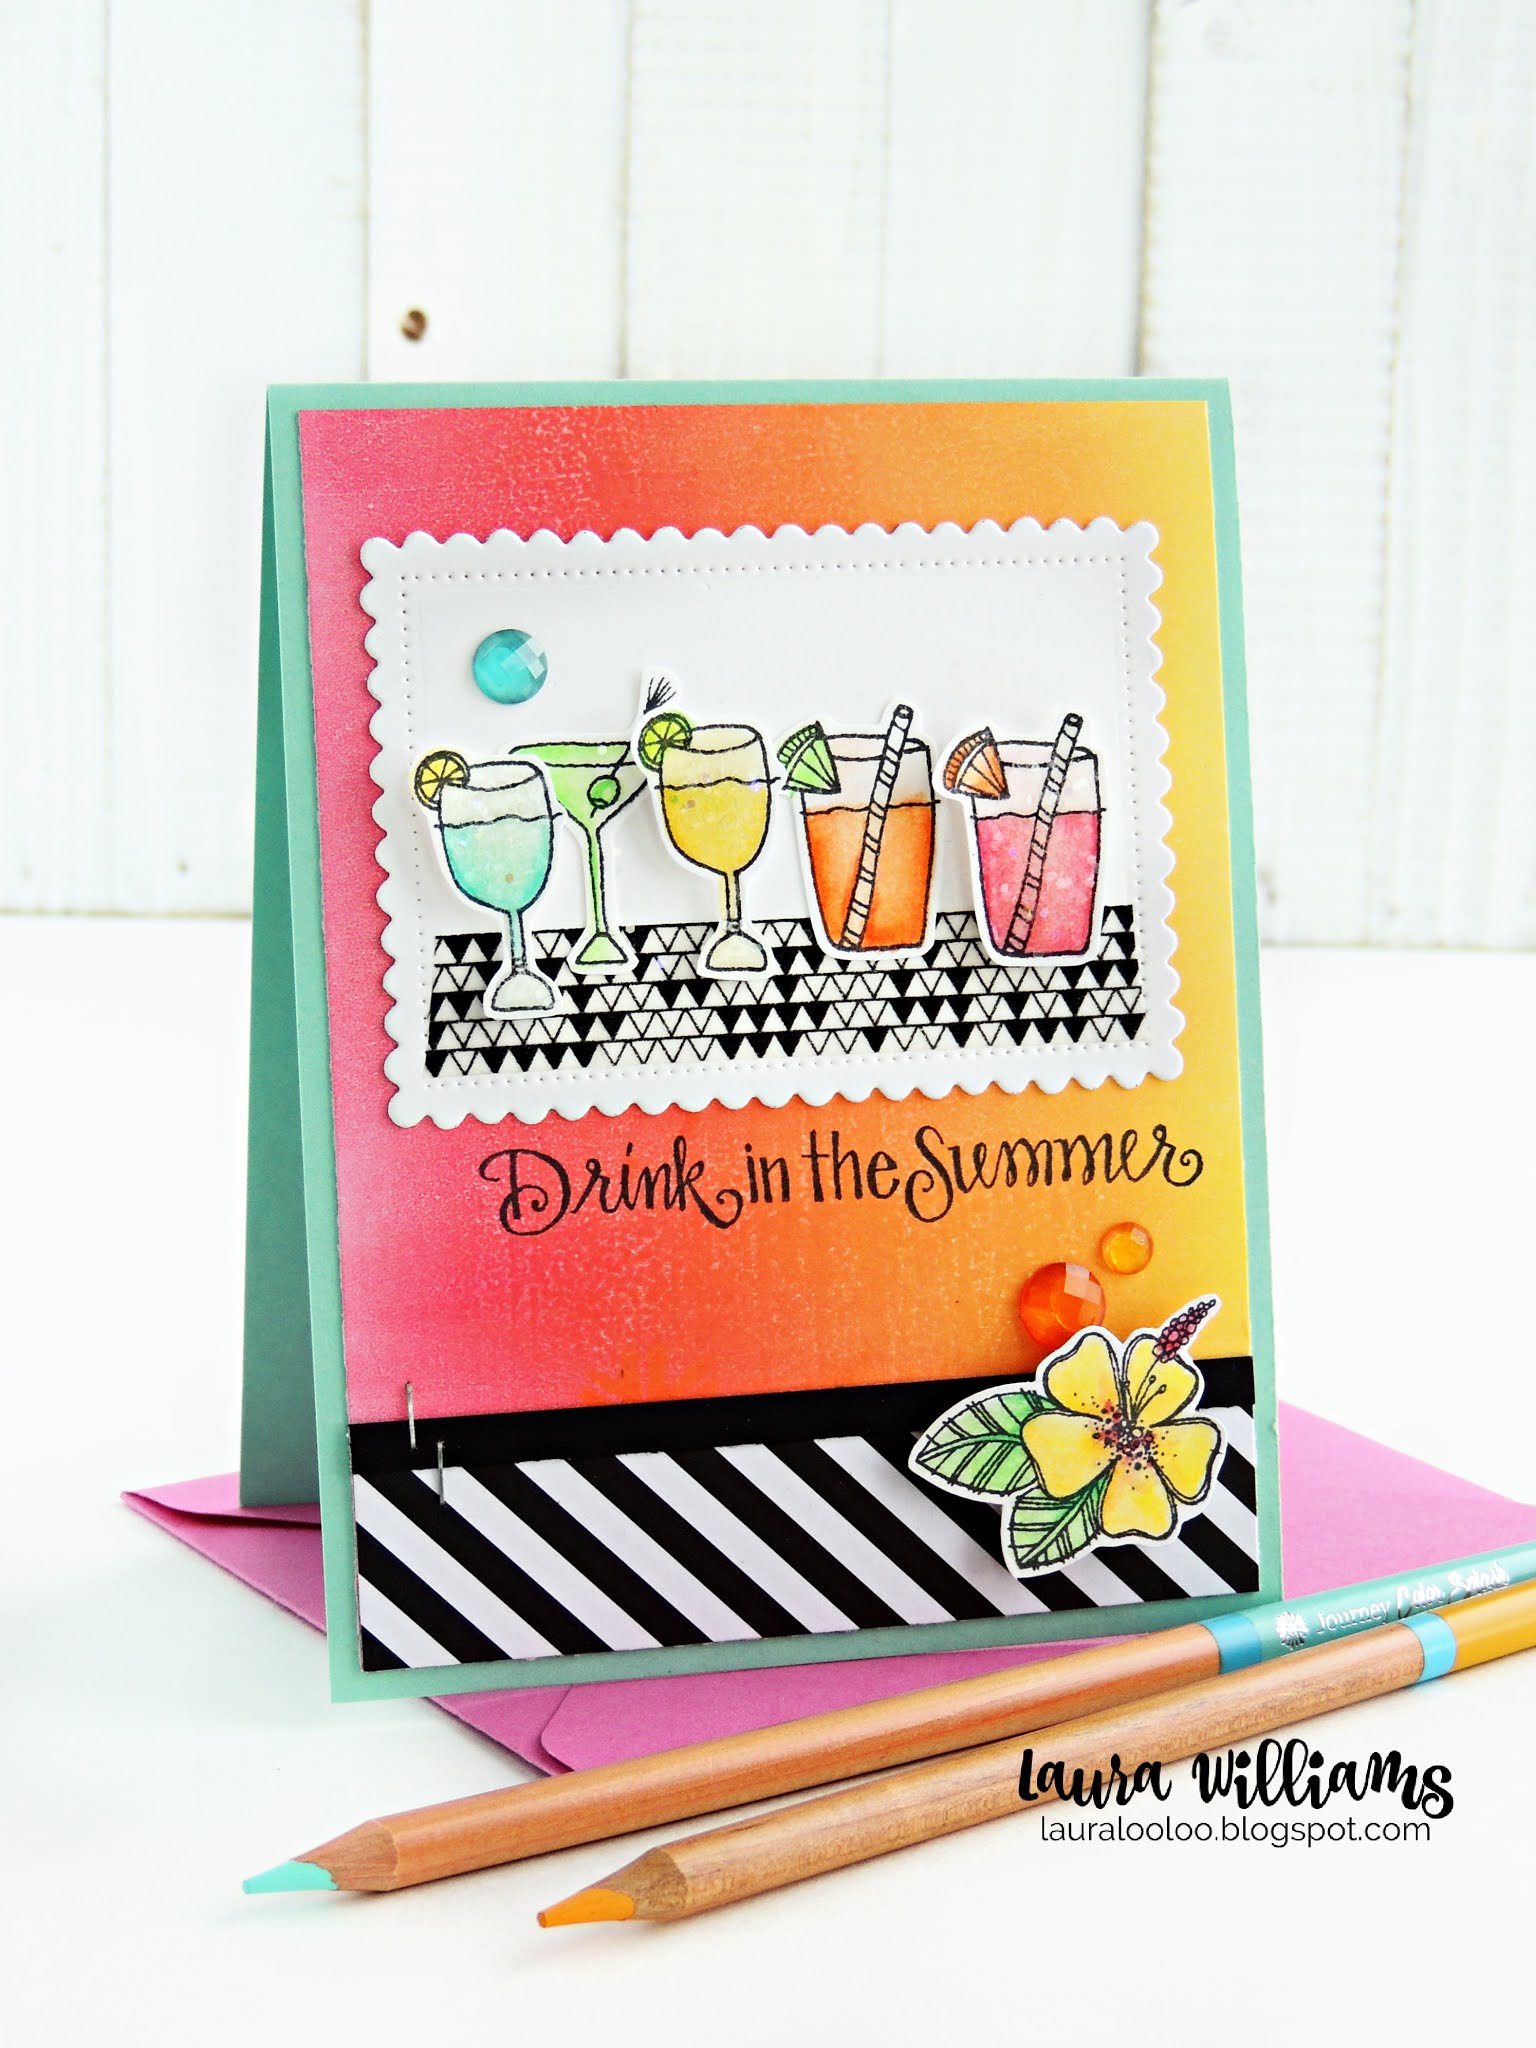 Drink in the Summer handmade summertime card making idea with Impression Obsession. Stamp and color colorful drinks and add to a Gel Press printed background for a tropical summer handmade card. Click to find all the details on this colorful card. #iostamps #cardmaking #stamping